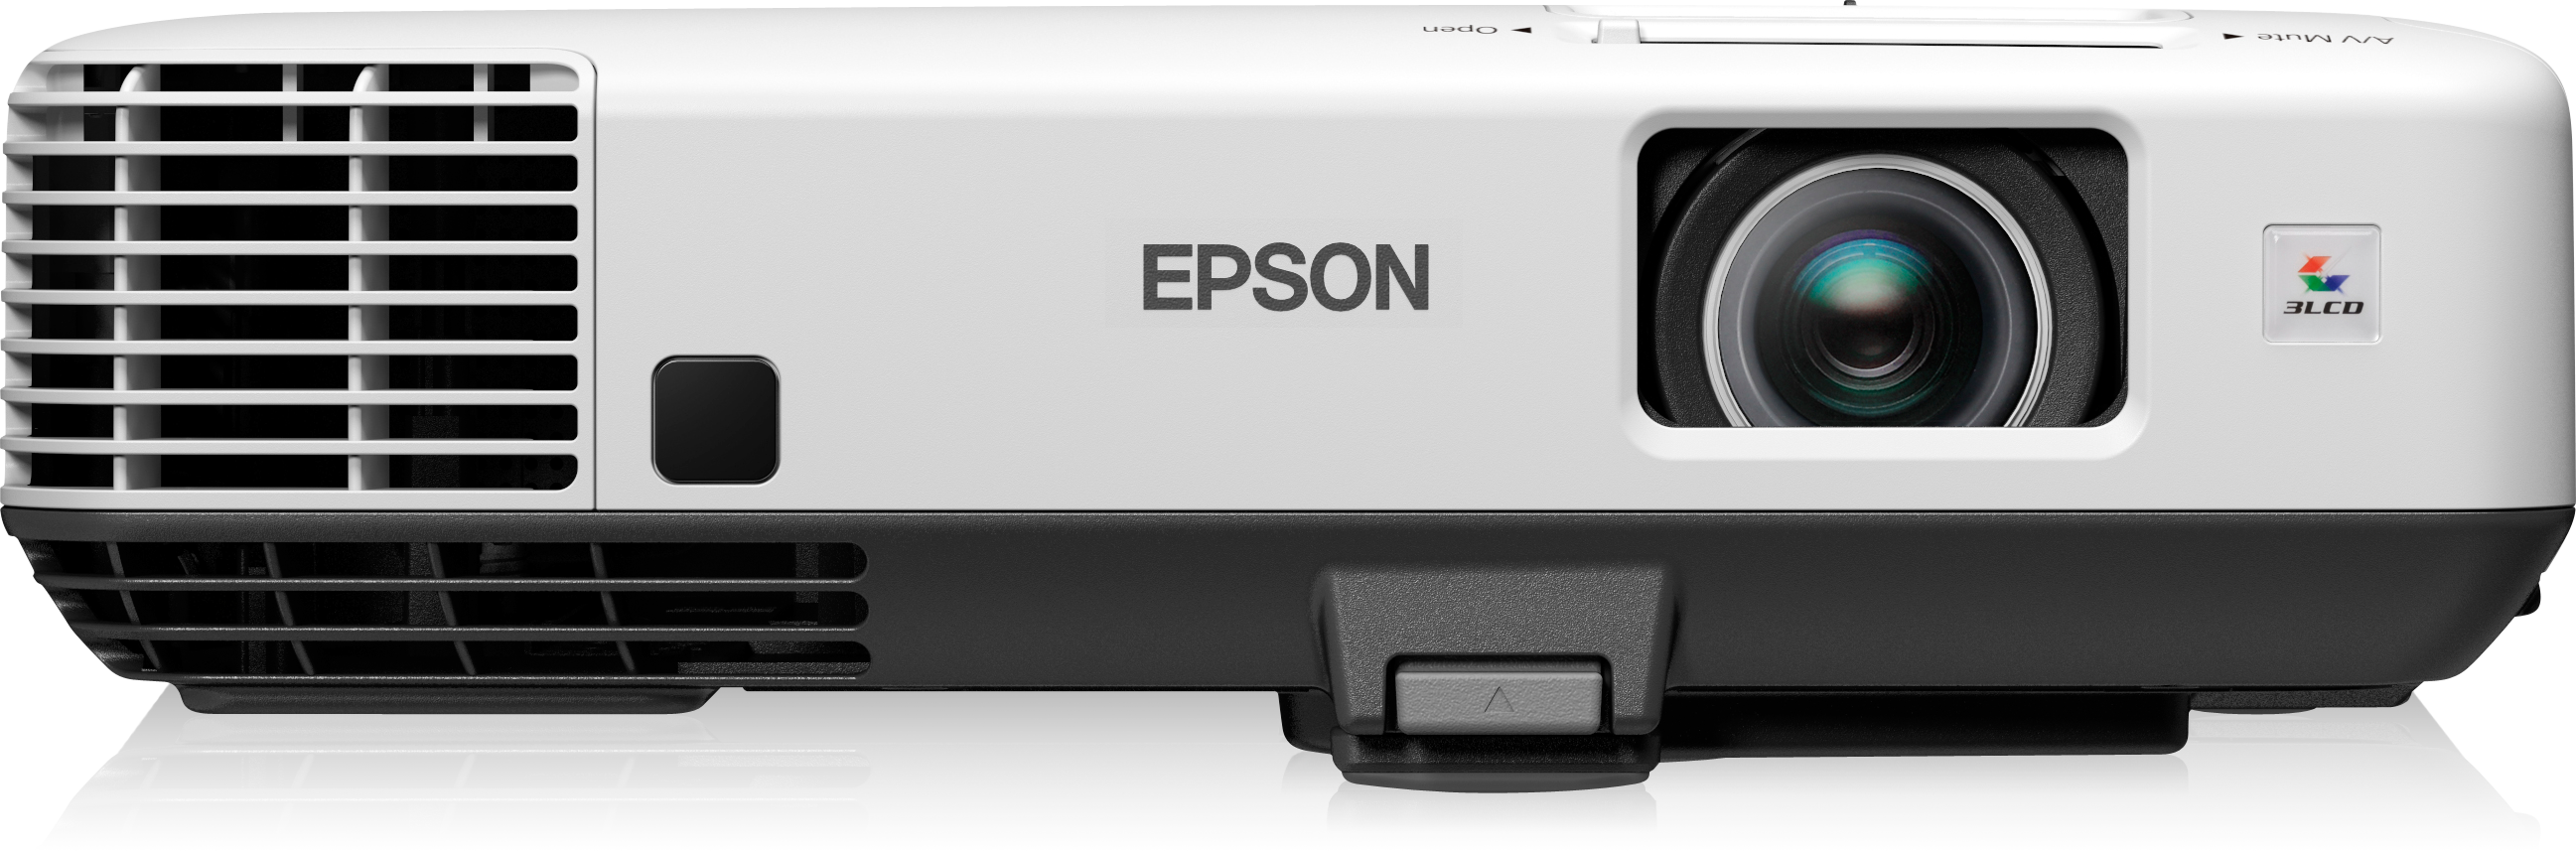 Epson EB-1880 | Installation | Projectors | Products | Epson Europe